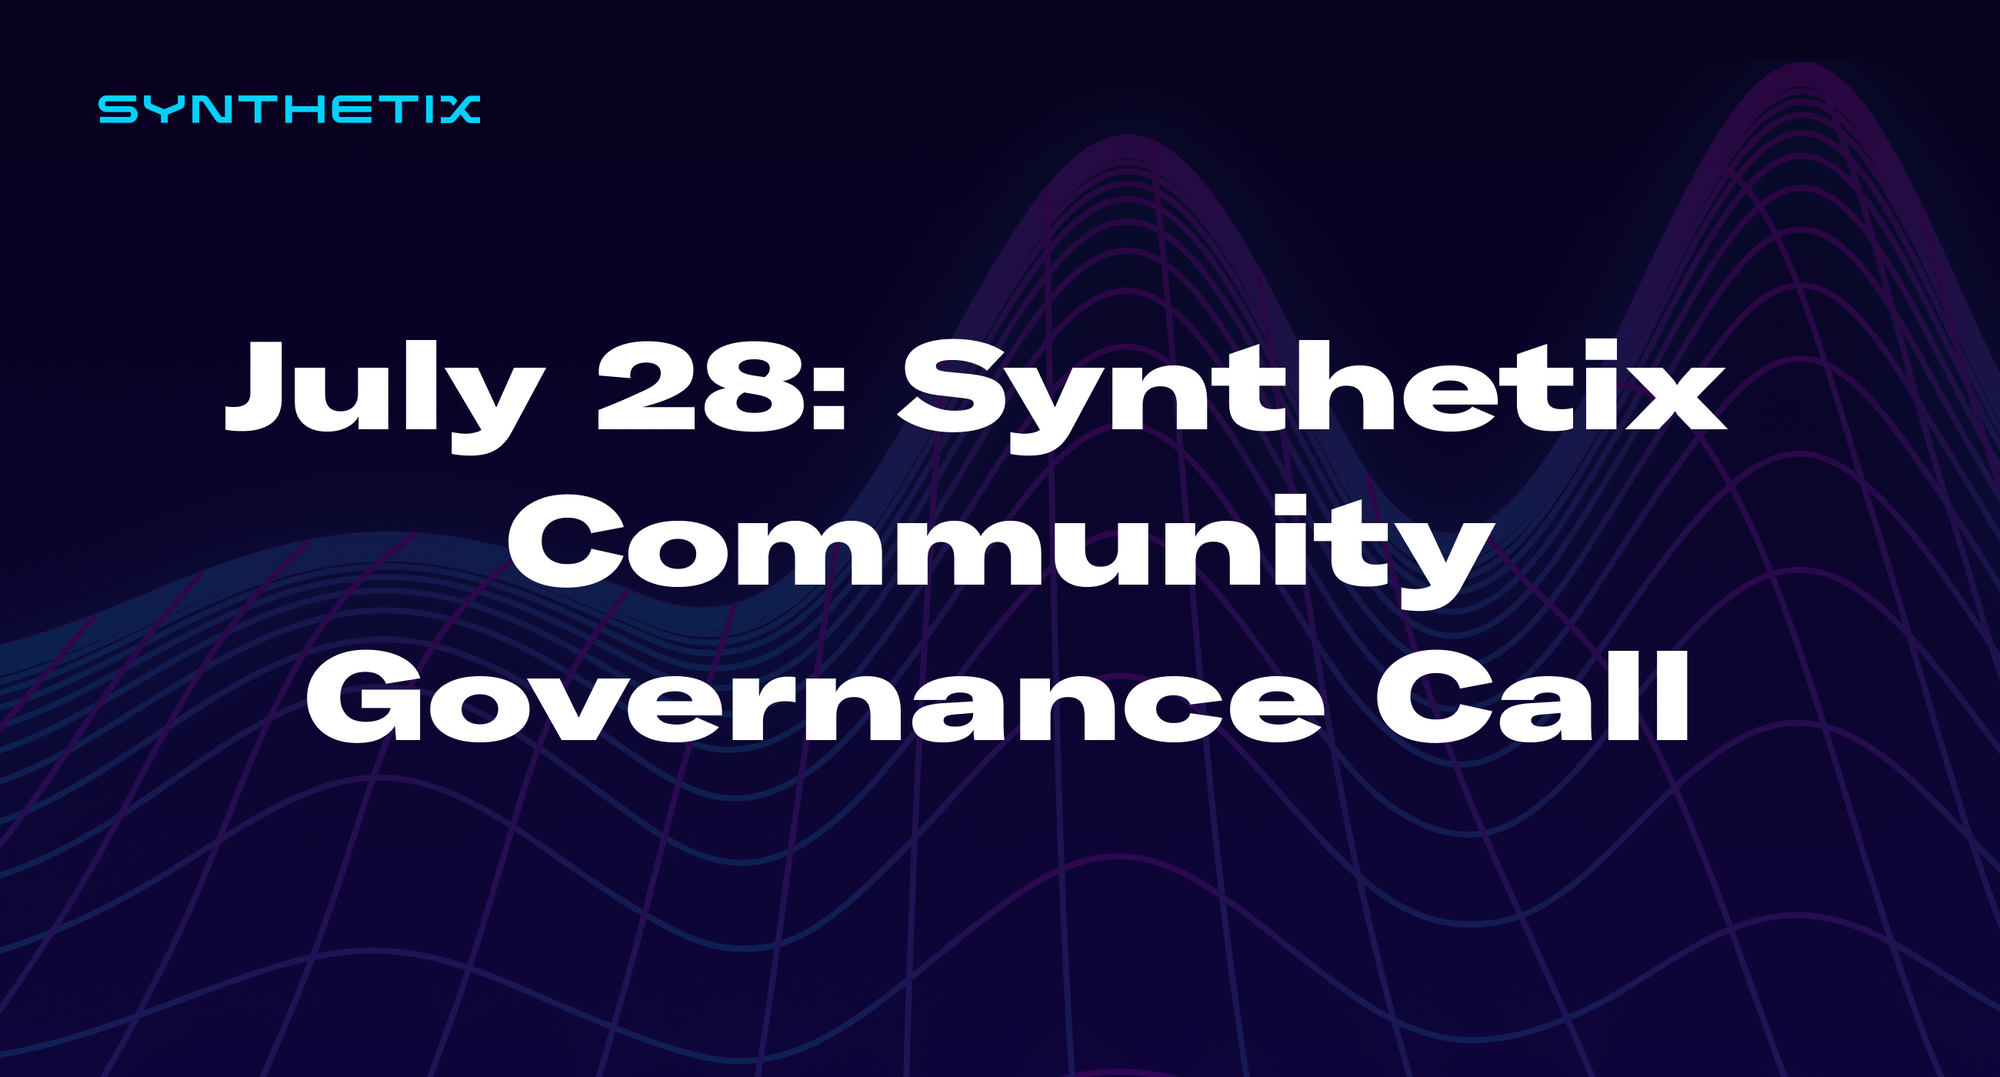 Come join us on July 28 for the next Synthetix community governance call!